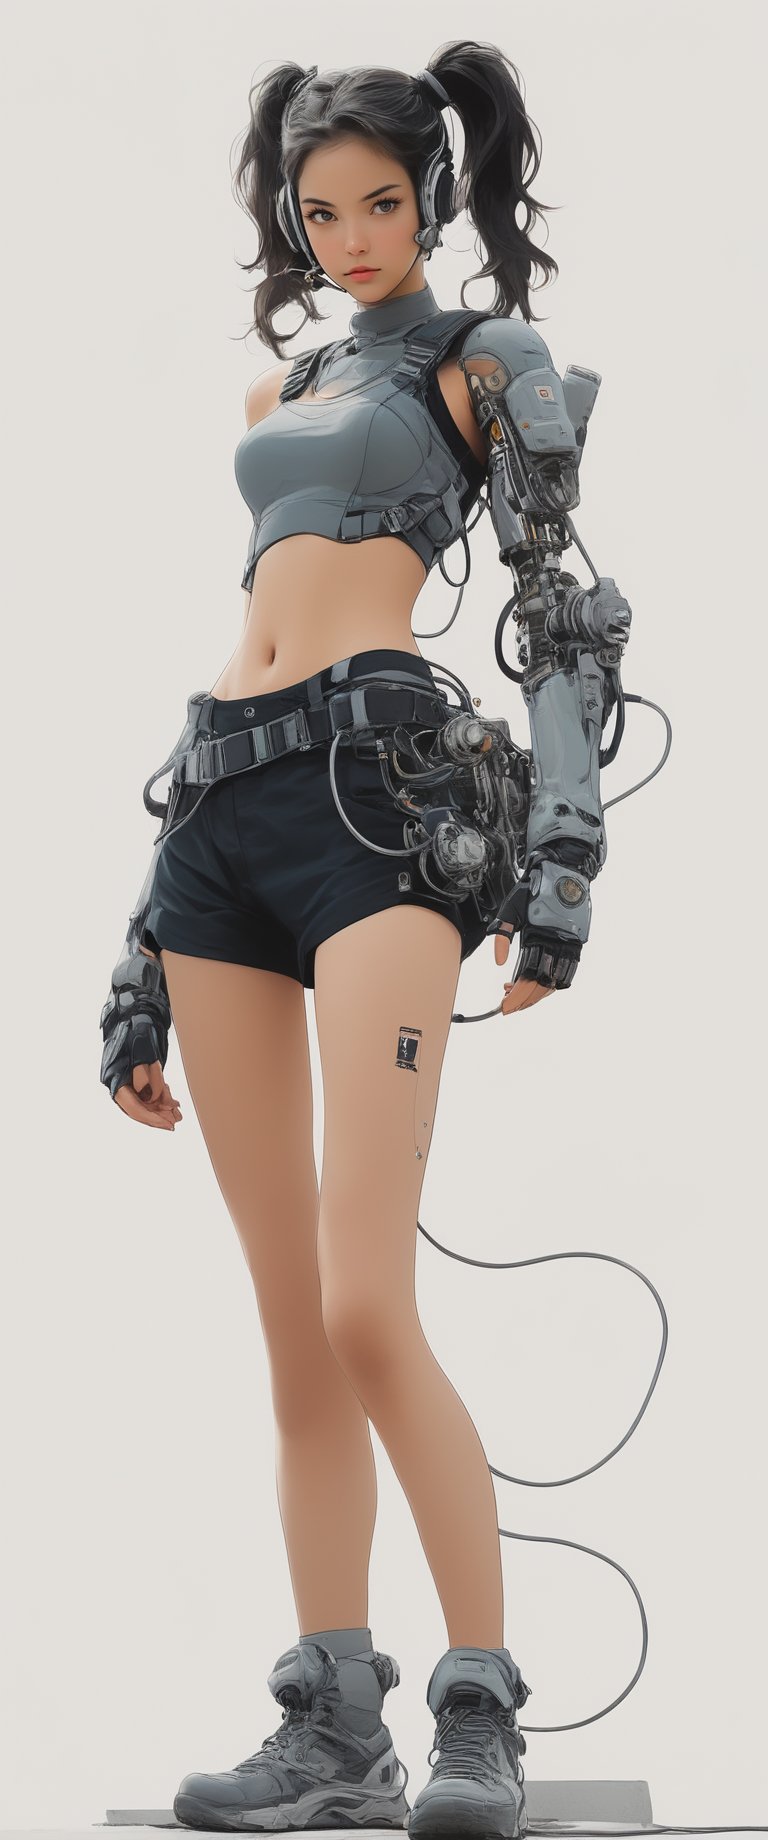 
A vibrant digital ilustration
A solo girl with long, flowing twintails stands confidently in front of a simple white background. Her gaze meets the viewer's as she proudly showcases her small breasts and navel. She wears short shorts with a thigh strap and a belt around her waist. A cyborg prosthetic arm protrudes from her shoulder, adorned with a cable and mechanical components. Her orange eyes gleam behind a mask and goggles, adding to her striking appearance.